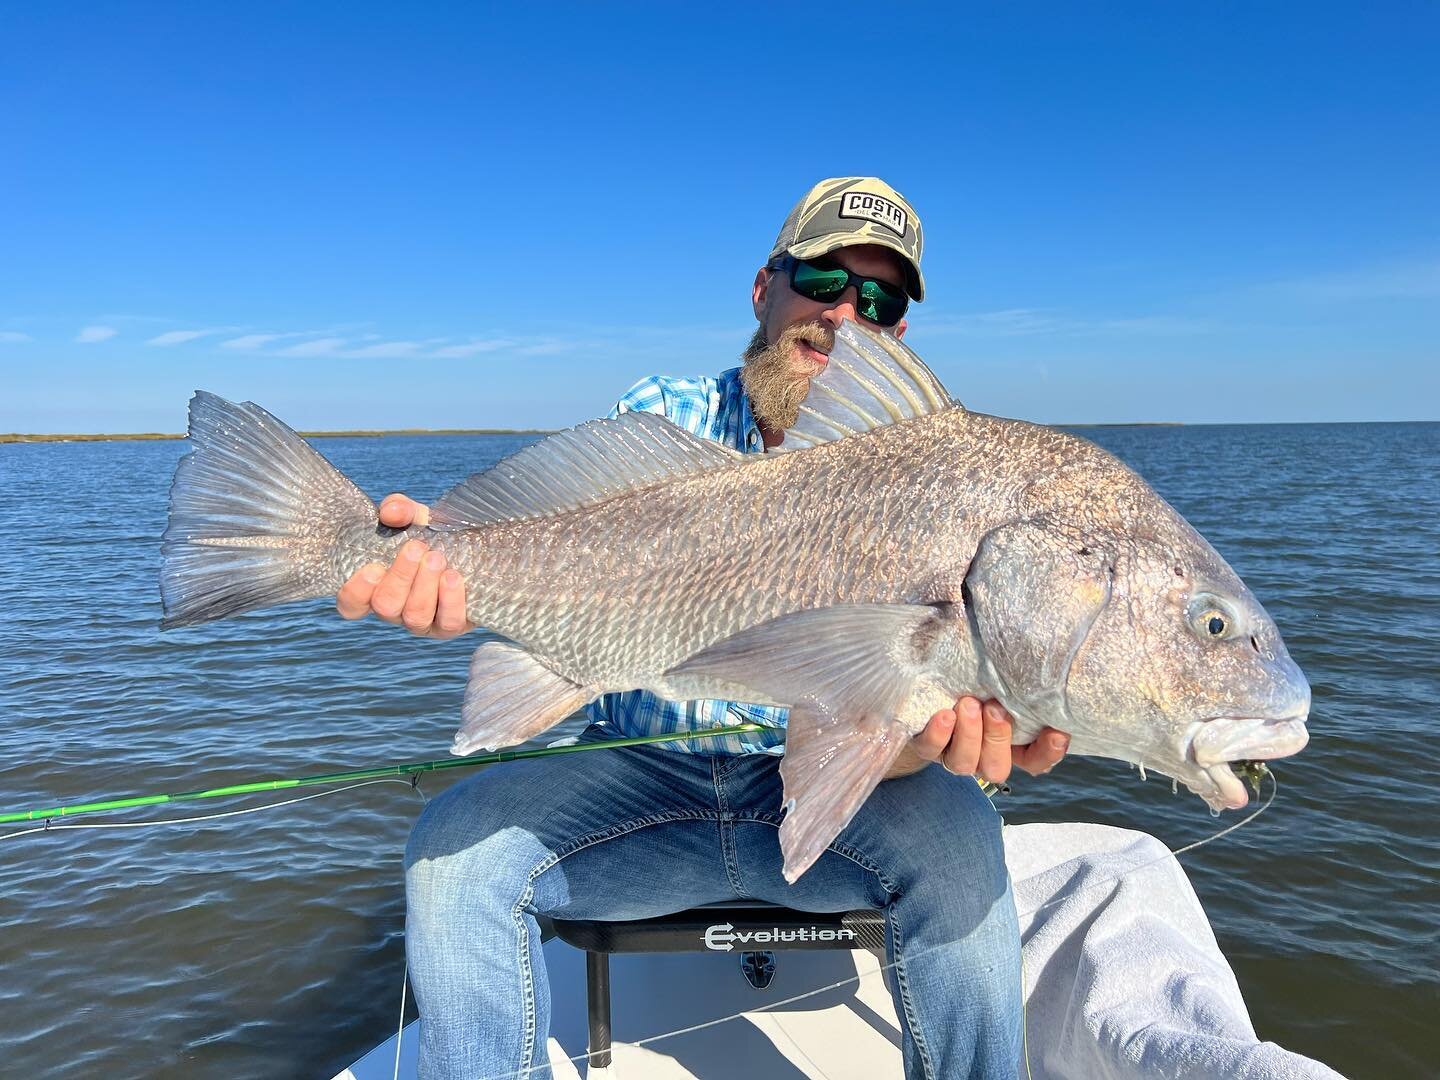 Not only did Daniel get his first redfish on fly, he also got a slam with a black drum, sheepshead, and redfish on fly in the same day. What a day, @something_something_flyfishing! Looking forward to having you back.